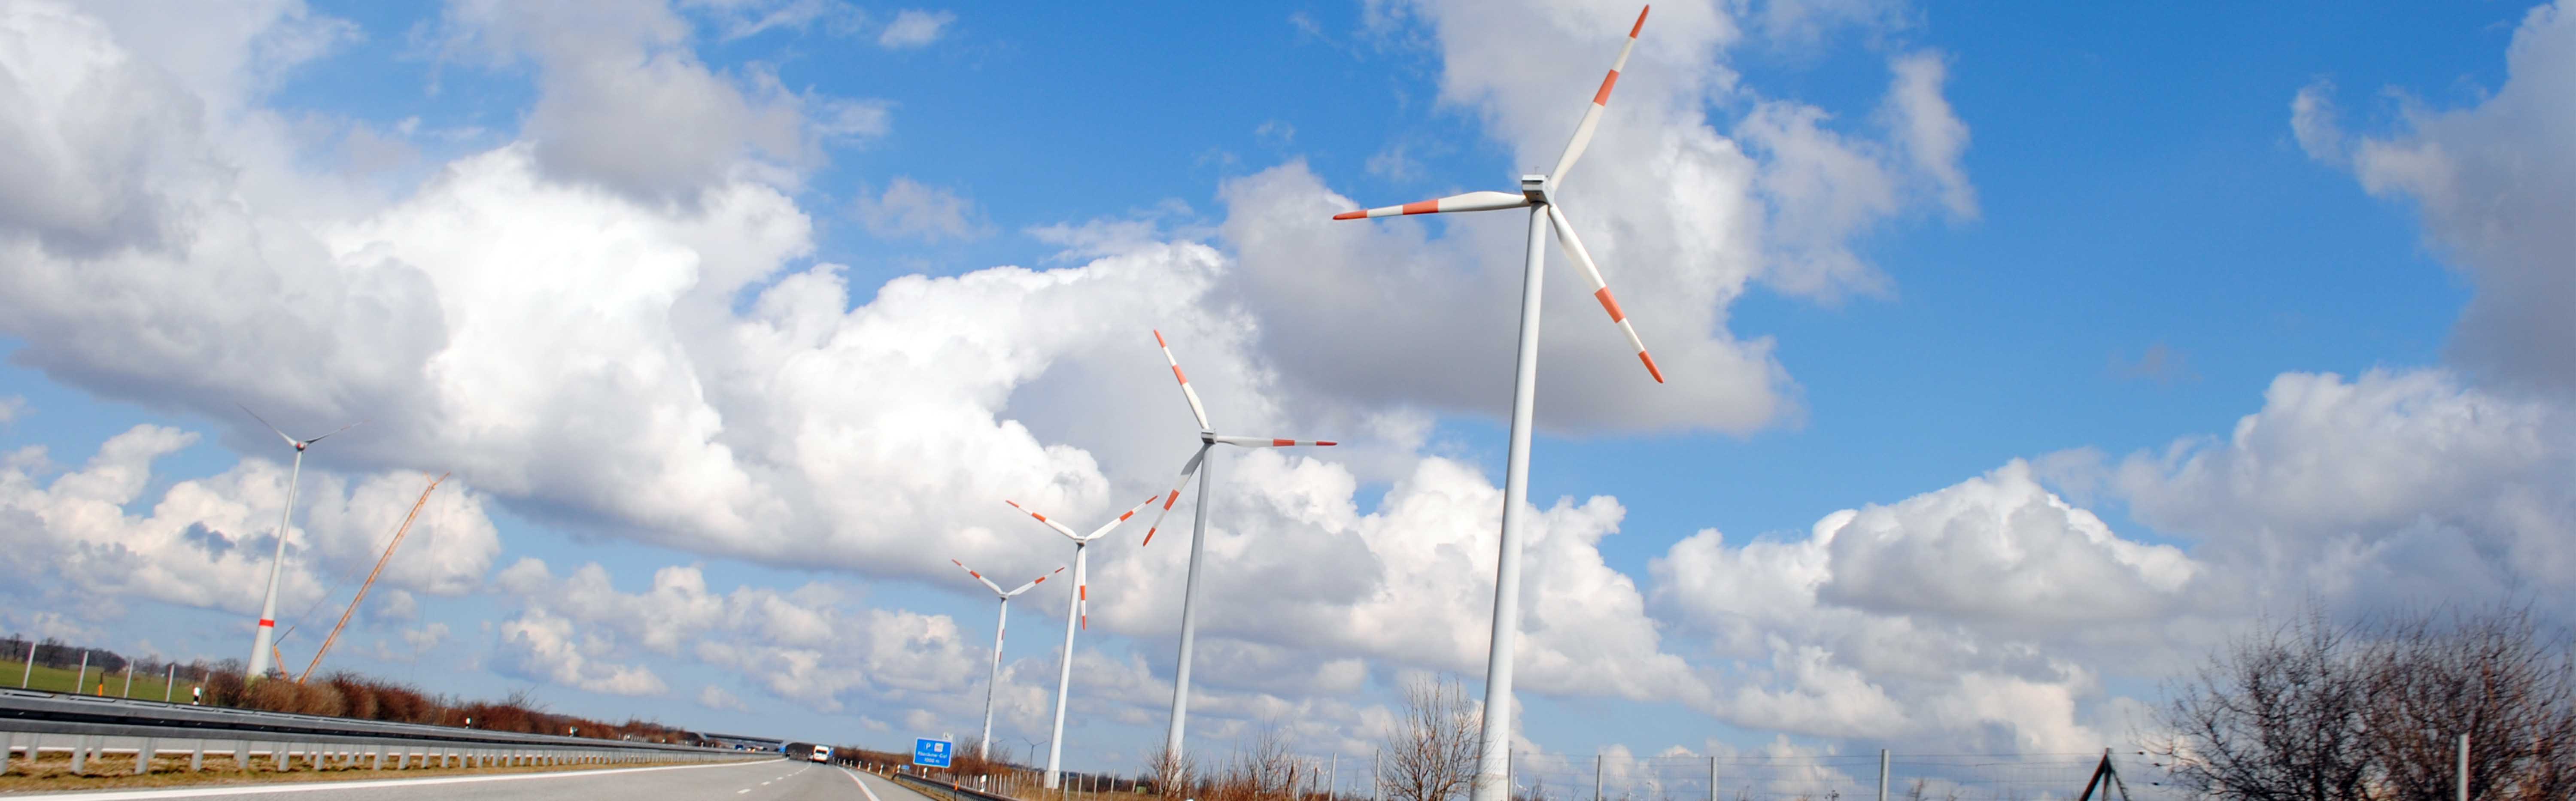 Photography of a highway with wind turbines on the edge with blue sky 